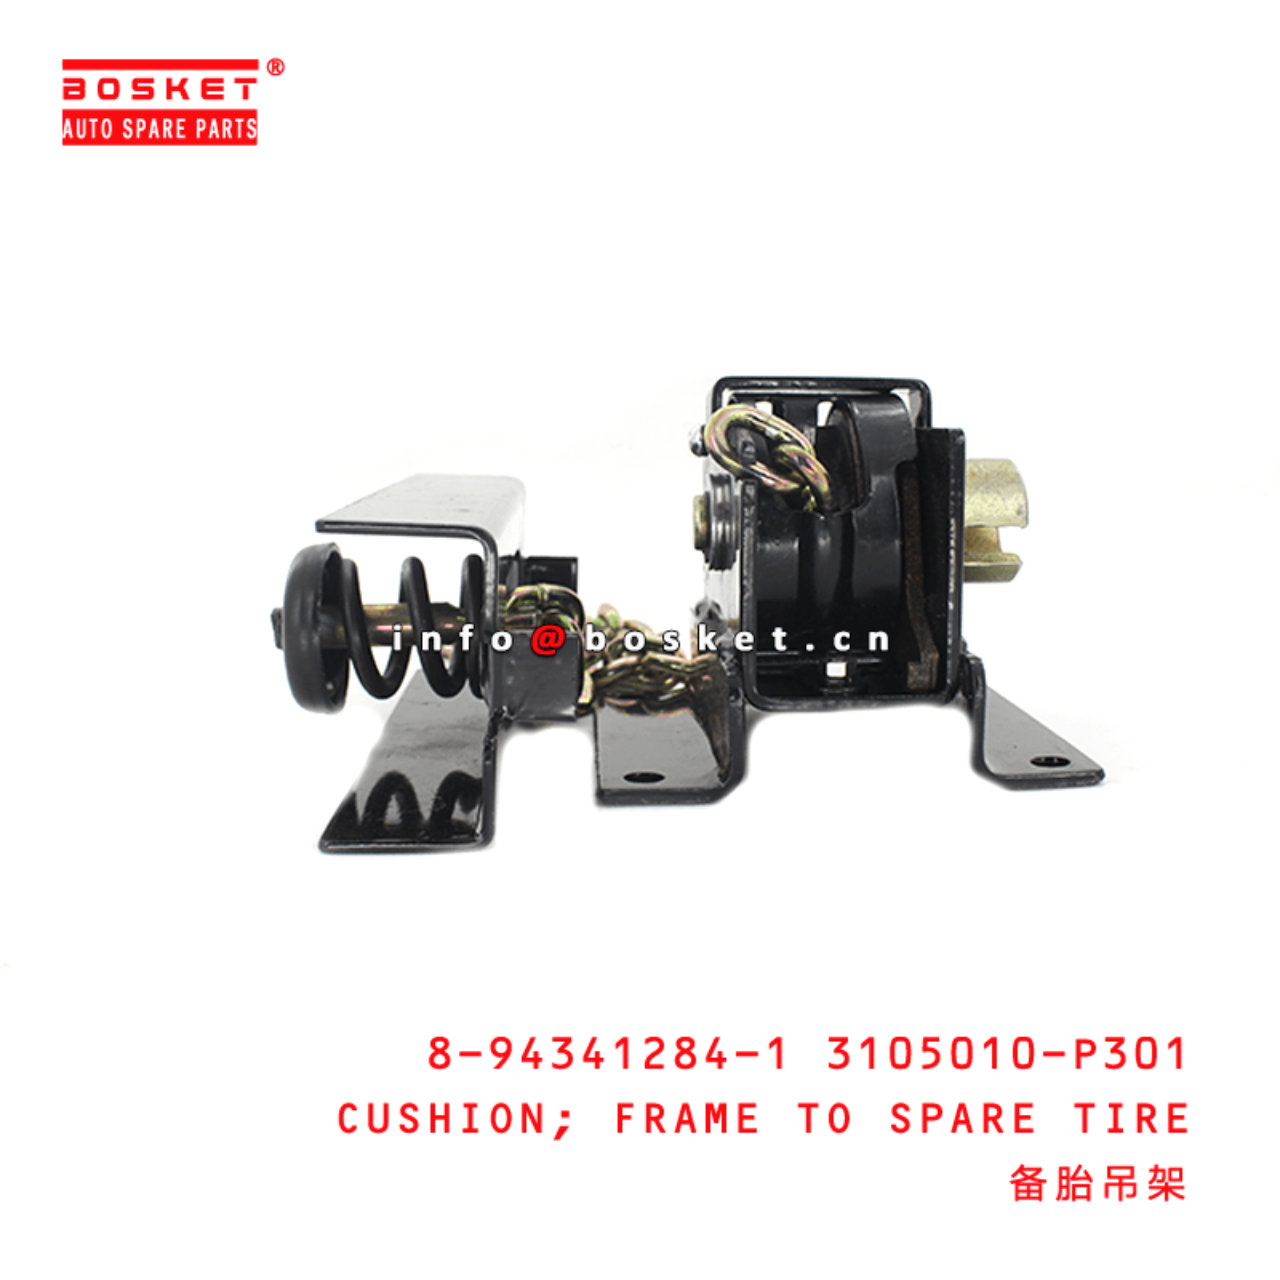 8-94341284-1 3105010-P301 Frame To Spare Tire Cushion 8943412841 3105010P301 Suitable for ISUZU 700P